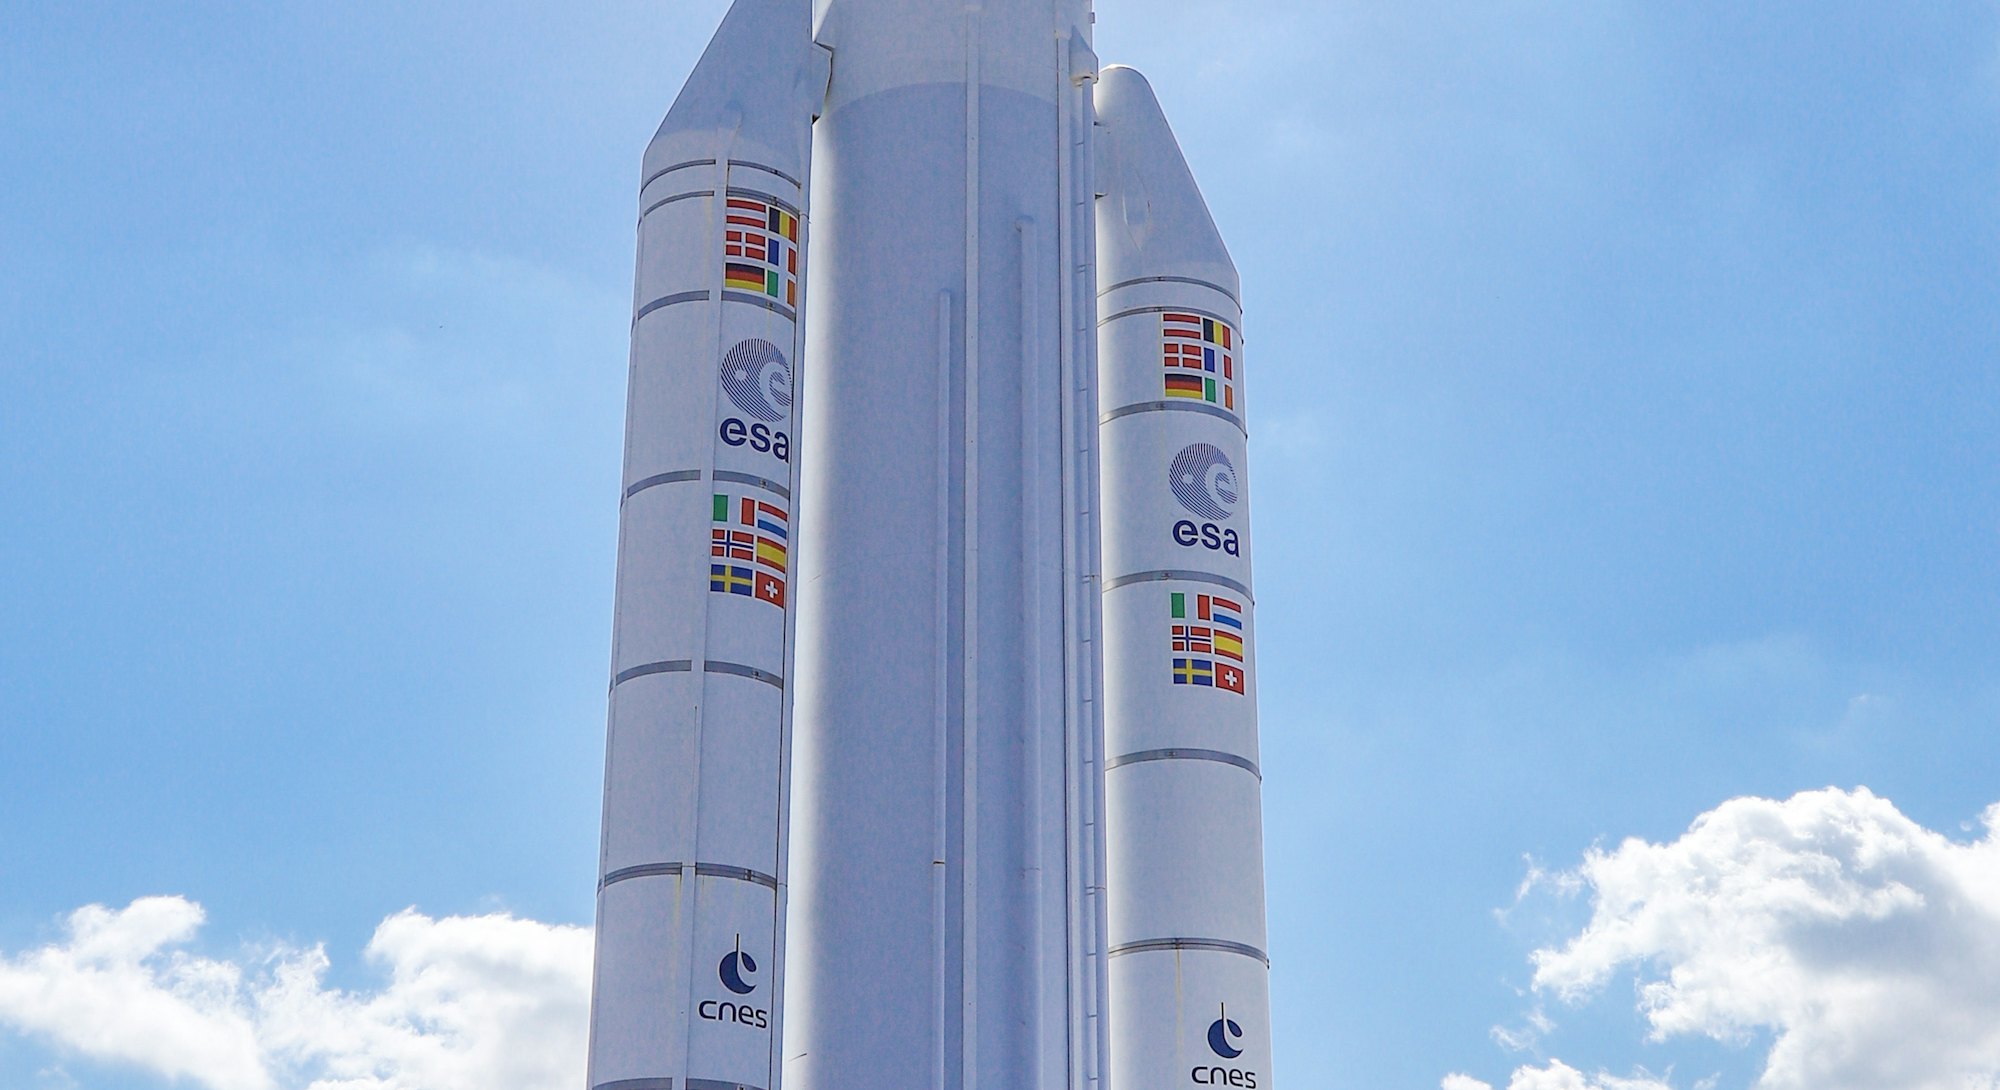 Ariane V space rocket with boosters standing. Full-scale model demonstration of Ariane 5 launcher sp...